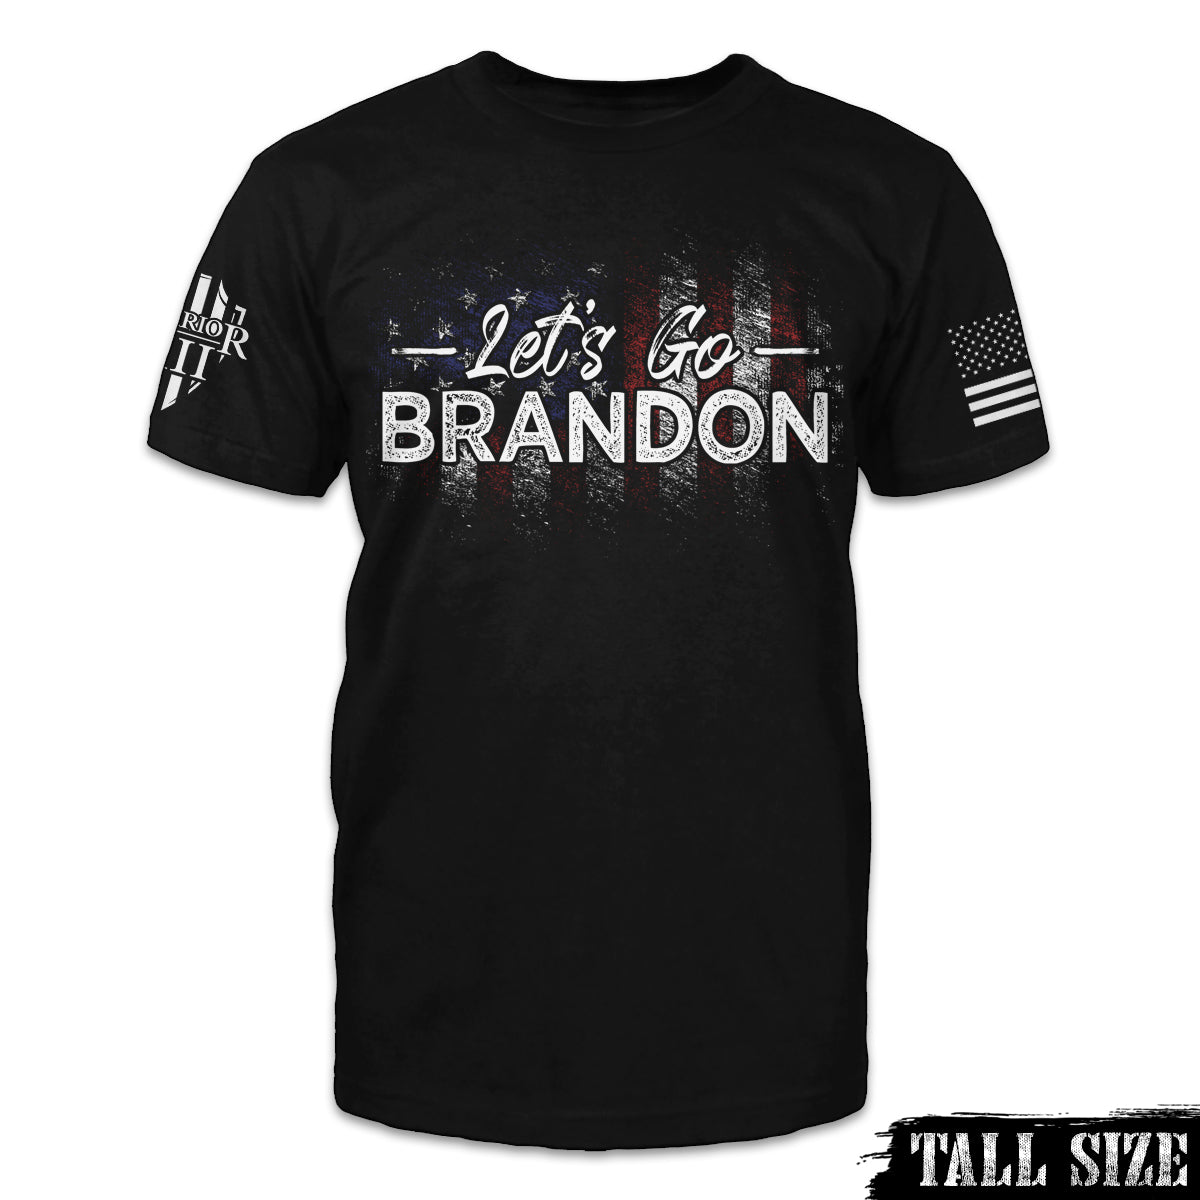 A black tall size shirt with the words "Let's Go Brandon" in front of a USA flag printed on the front of the shirt.